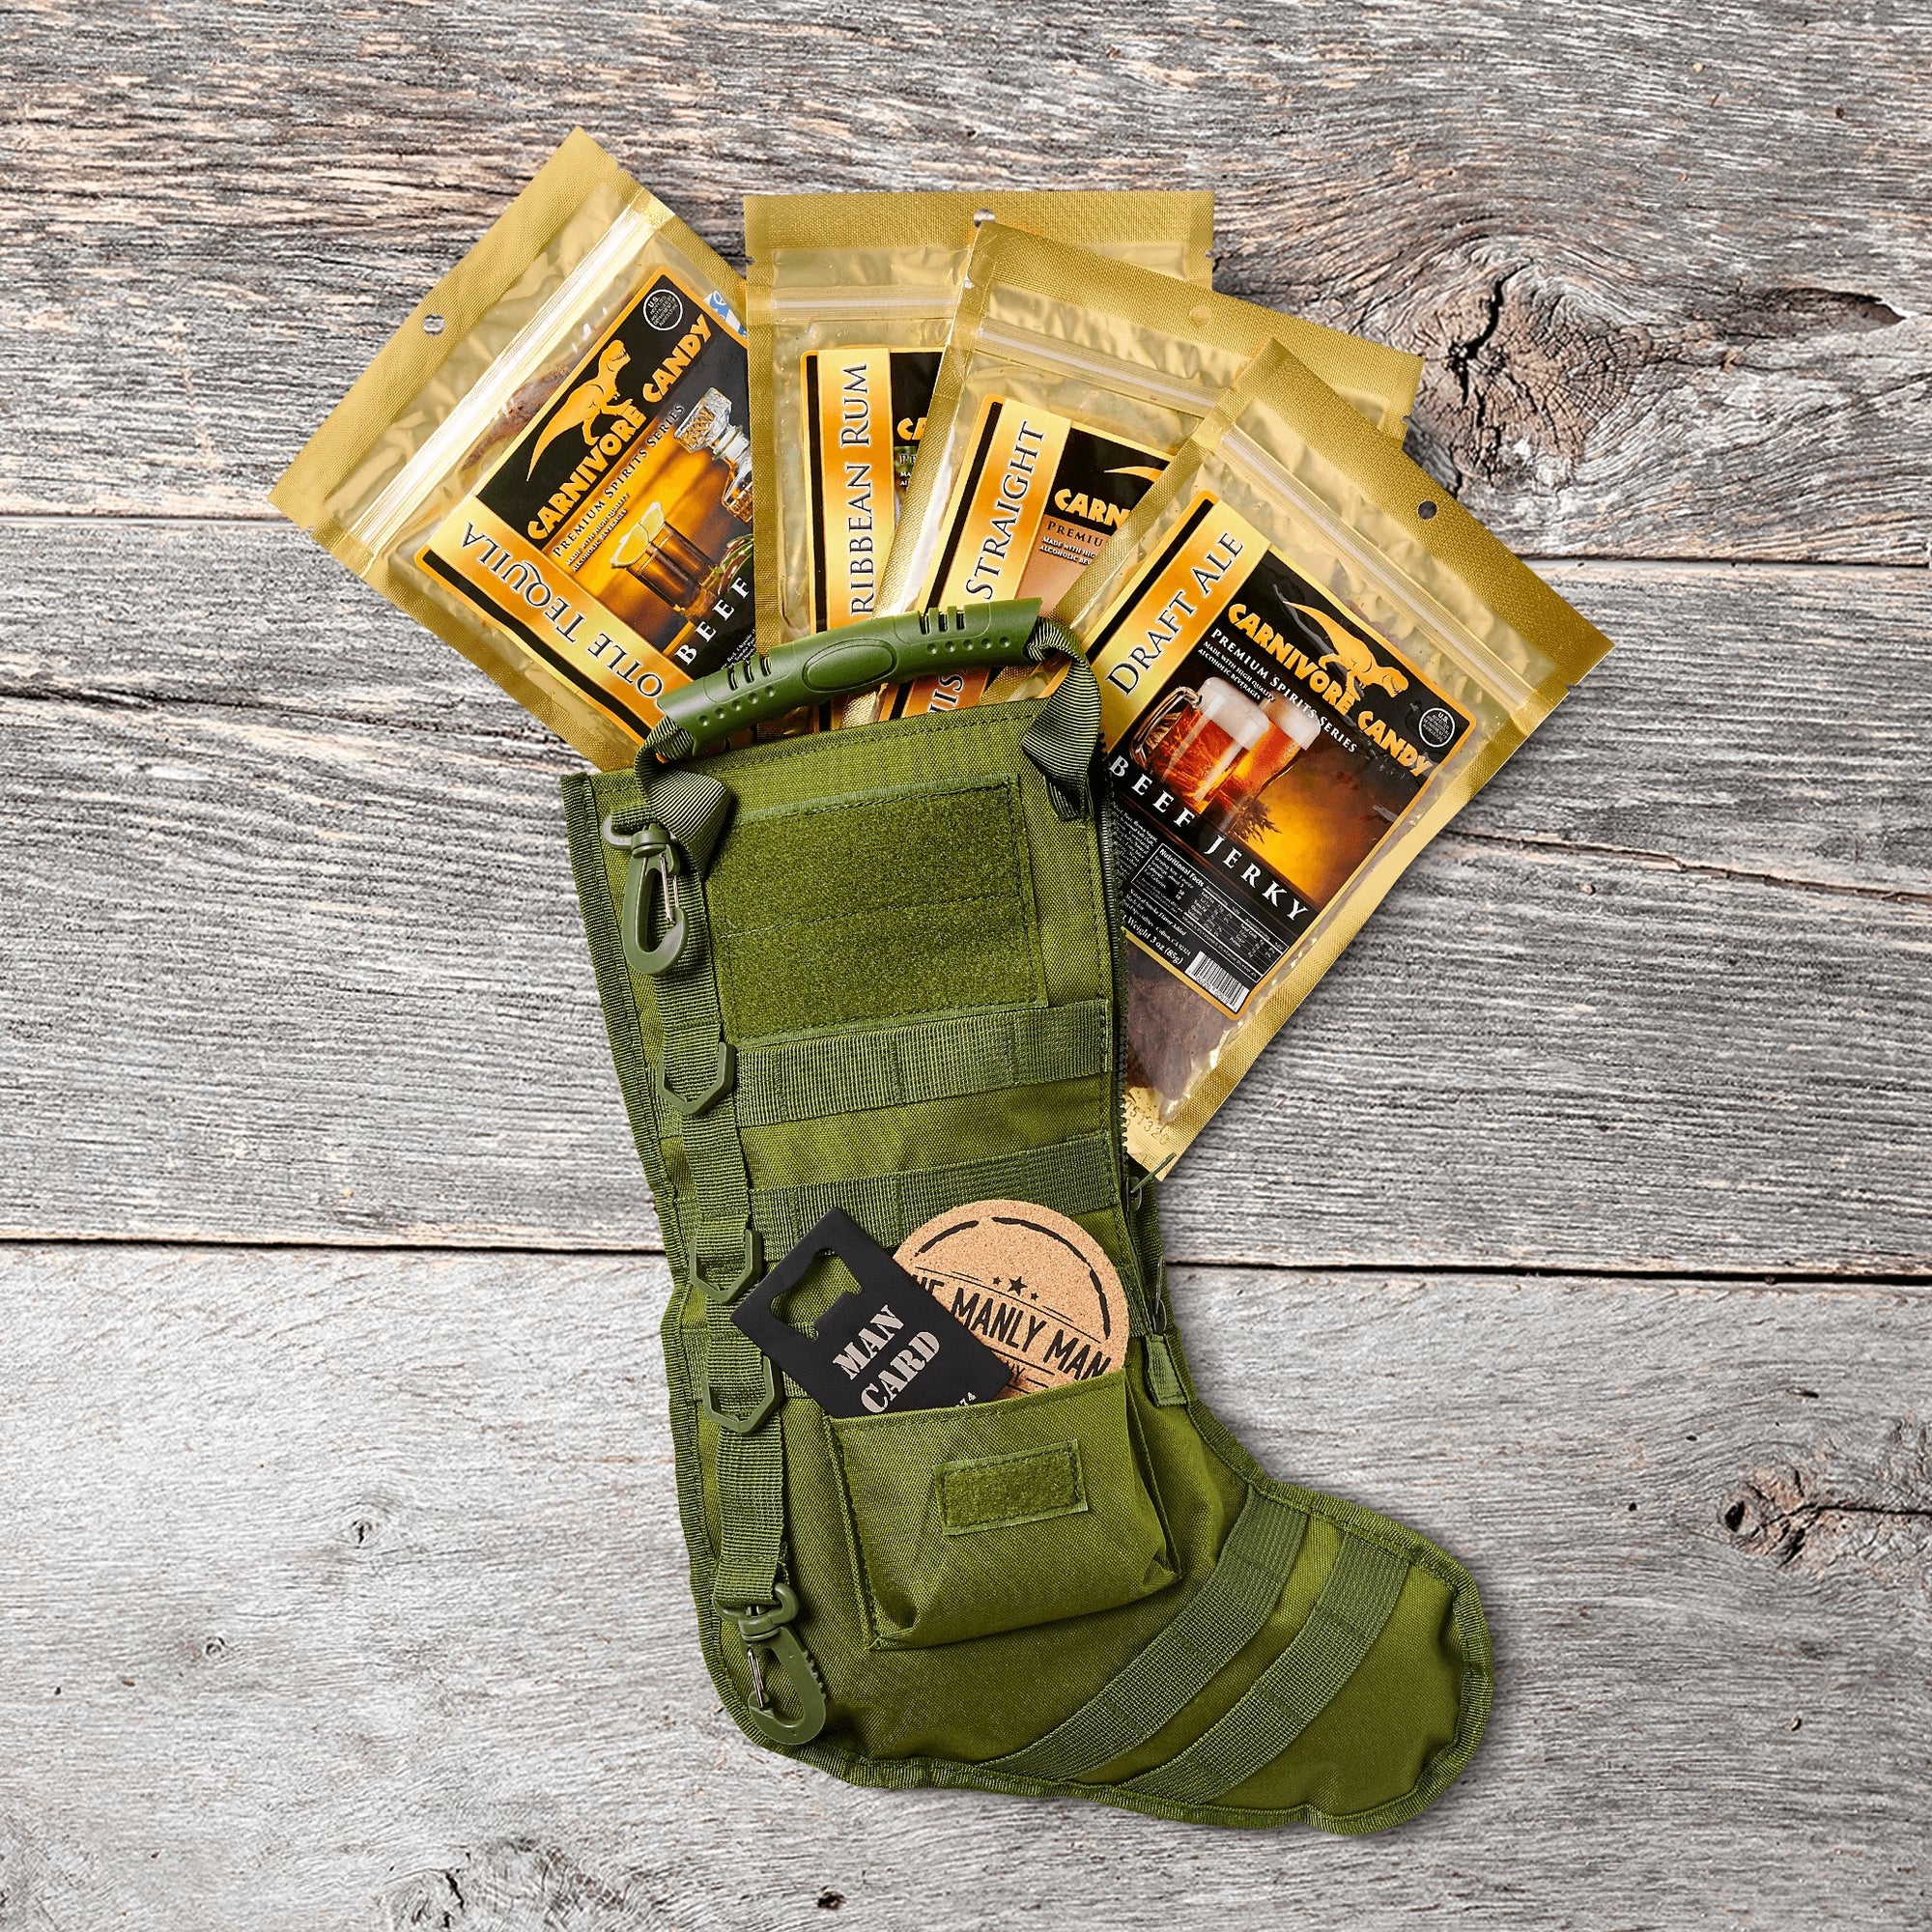 O.D. green MOLLE tactical Christmas stocking filled with alcohol-infused jerky